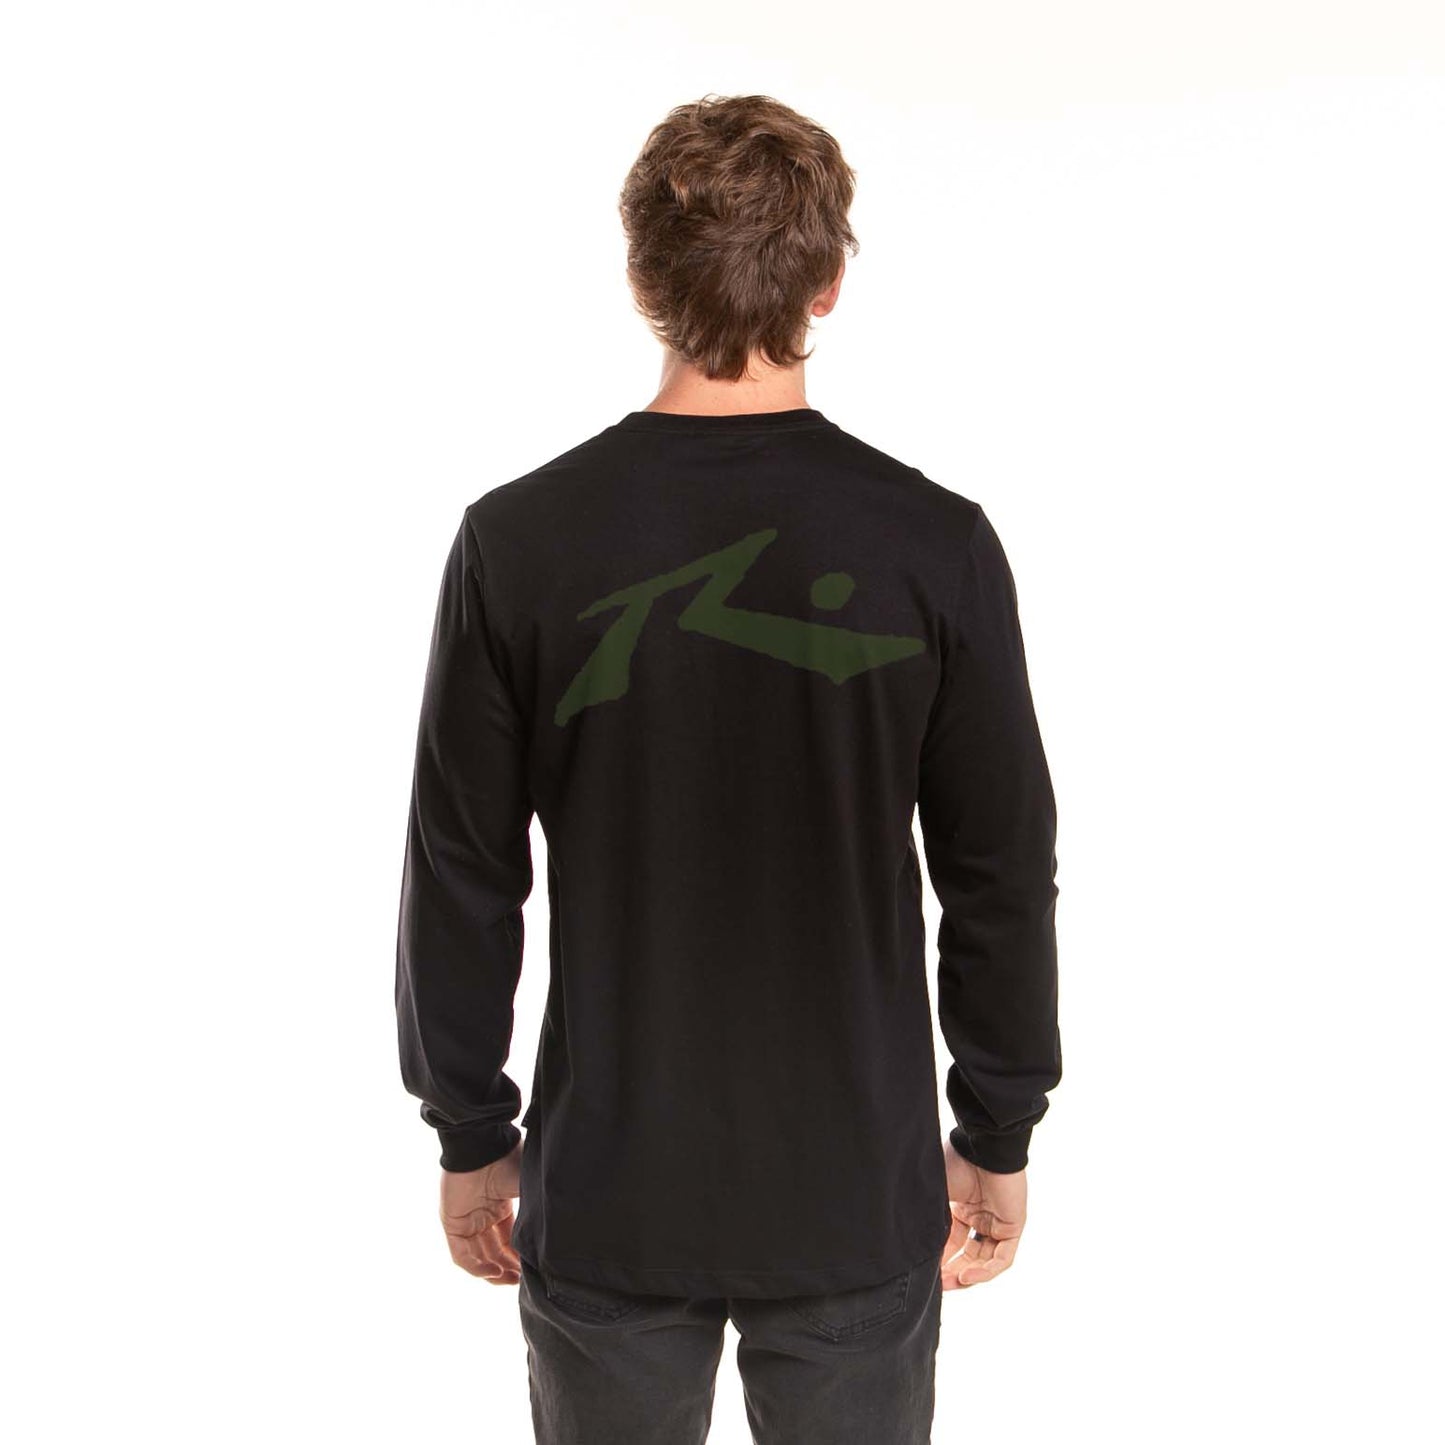 Remera Ml Competition Ls Black/Army